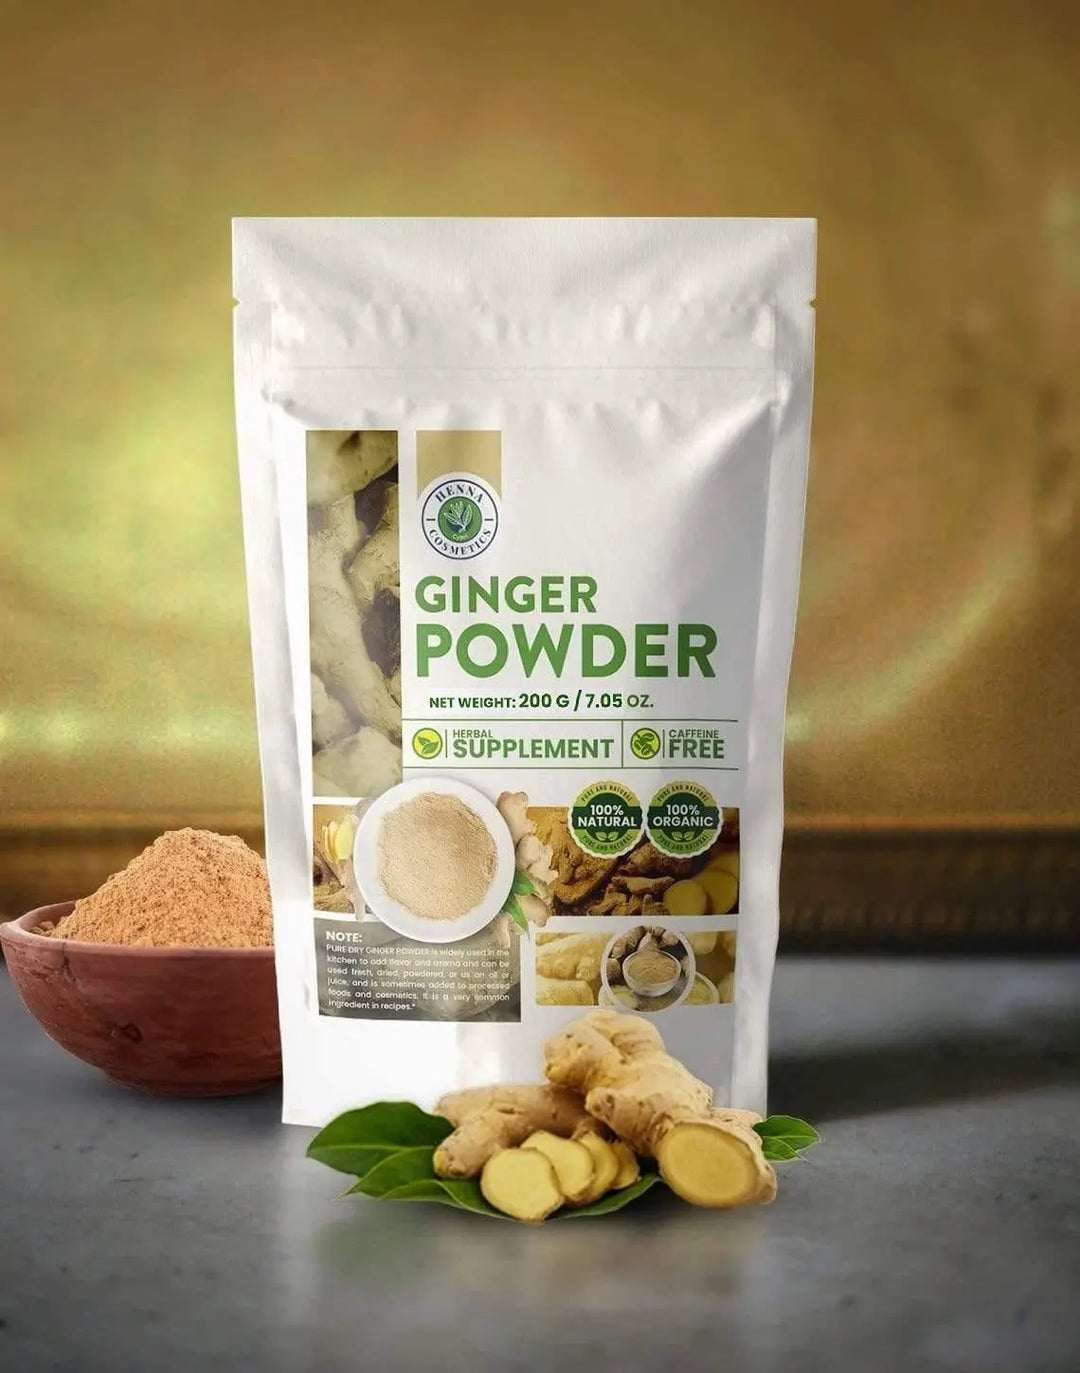 Ginger Powder 200 Grams (7.05 oz.) Spice and Herbal Supplement